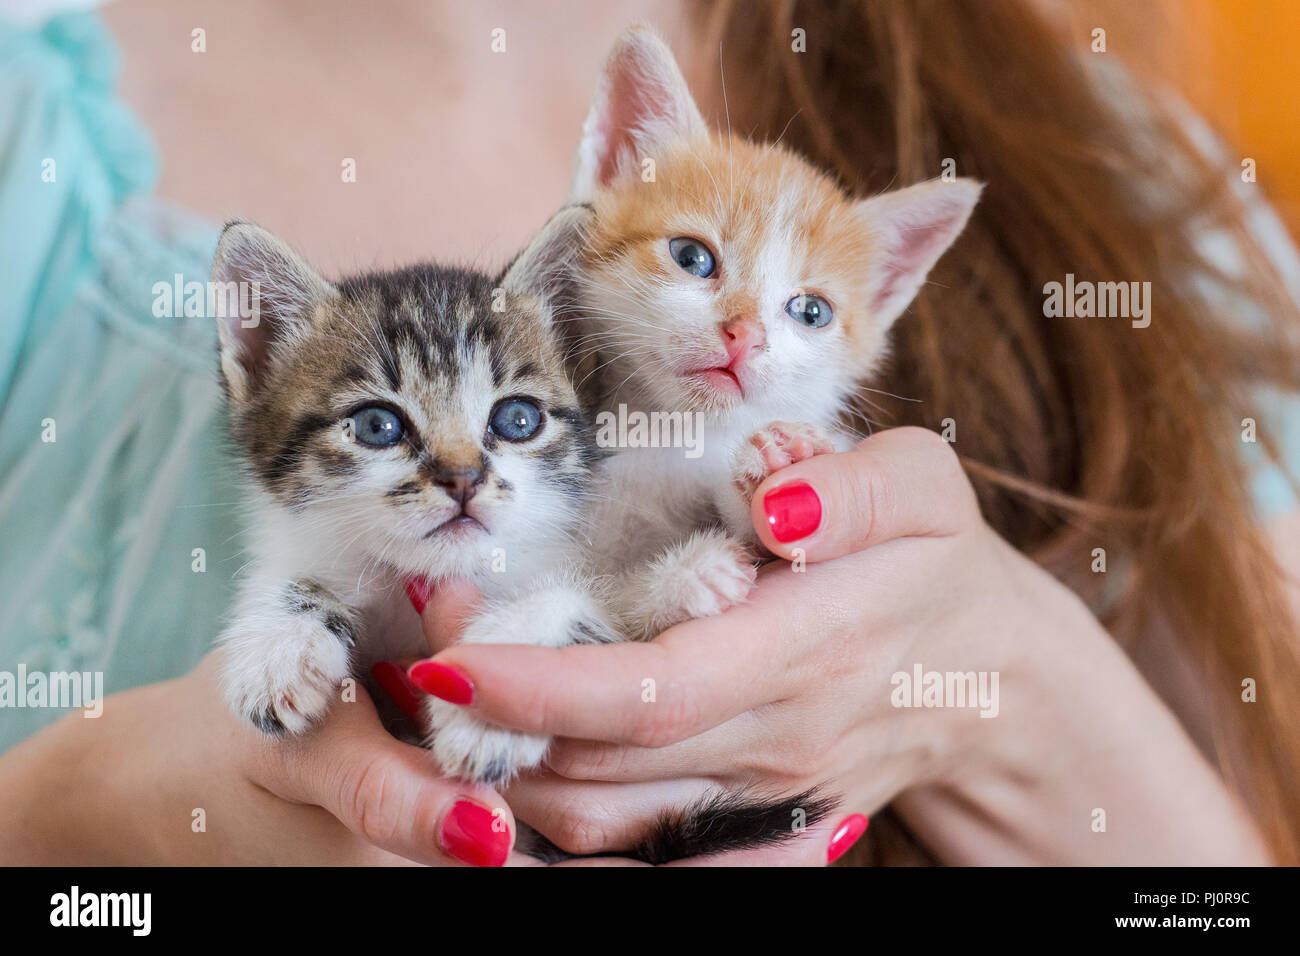 Close up of two cute kittens in woman's hands. Stock Photo